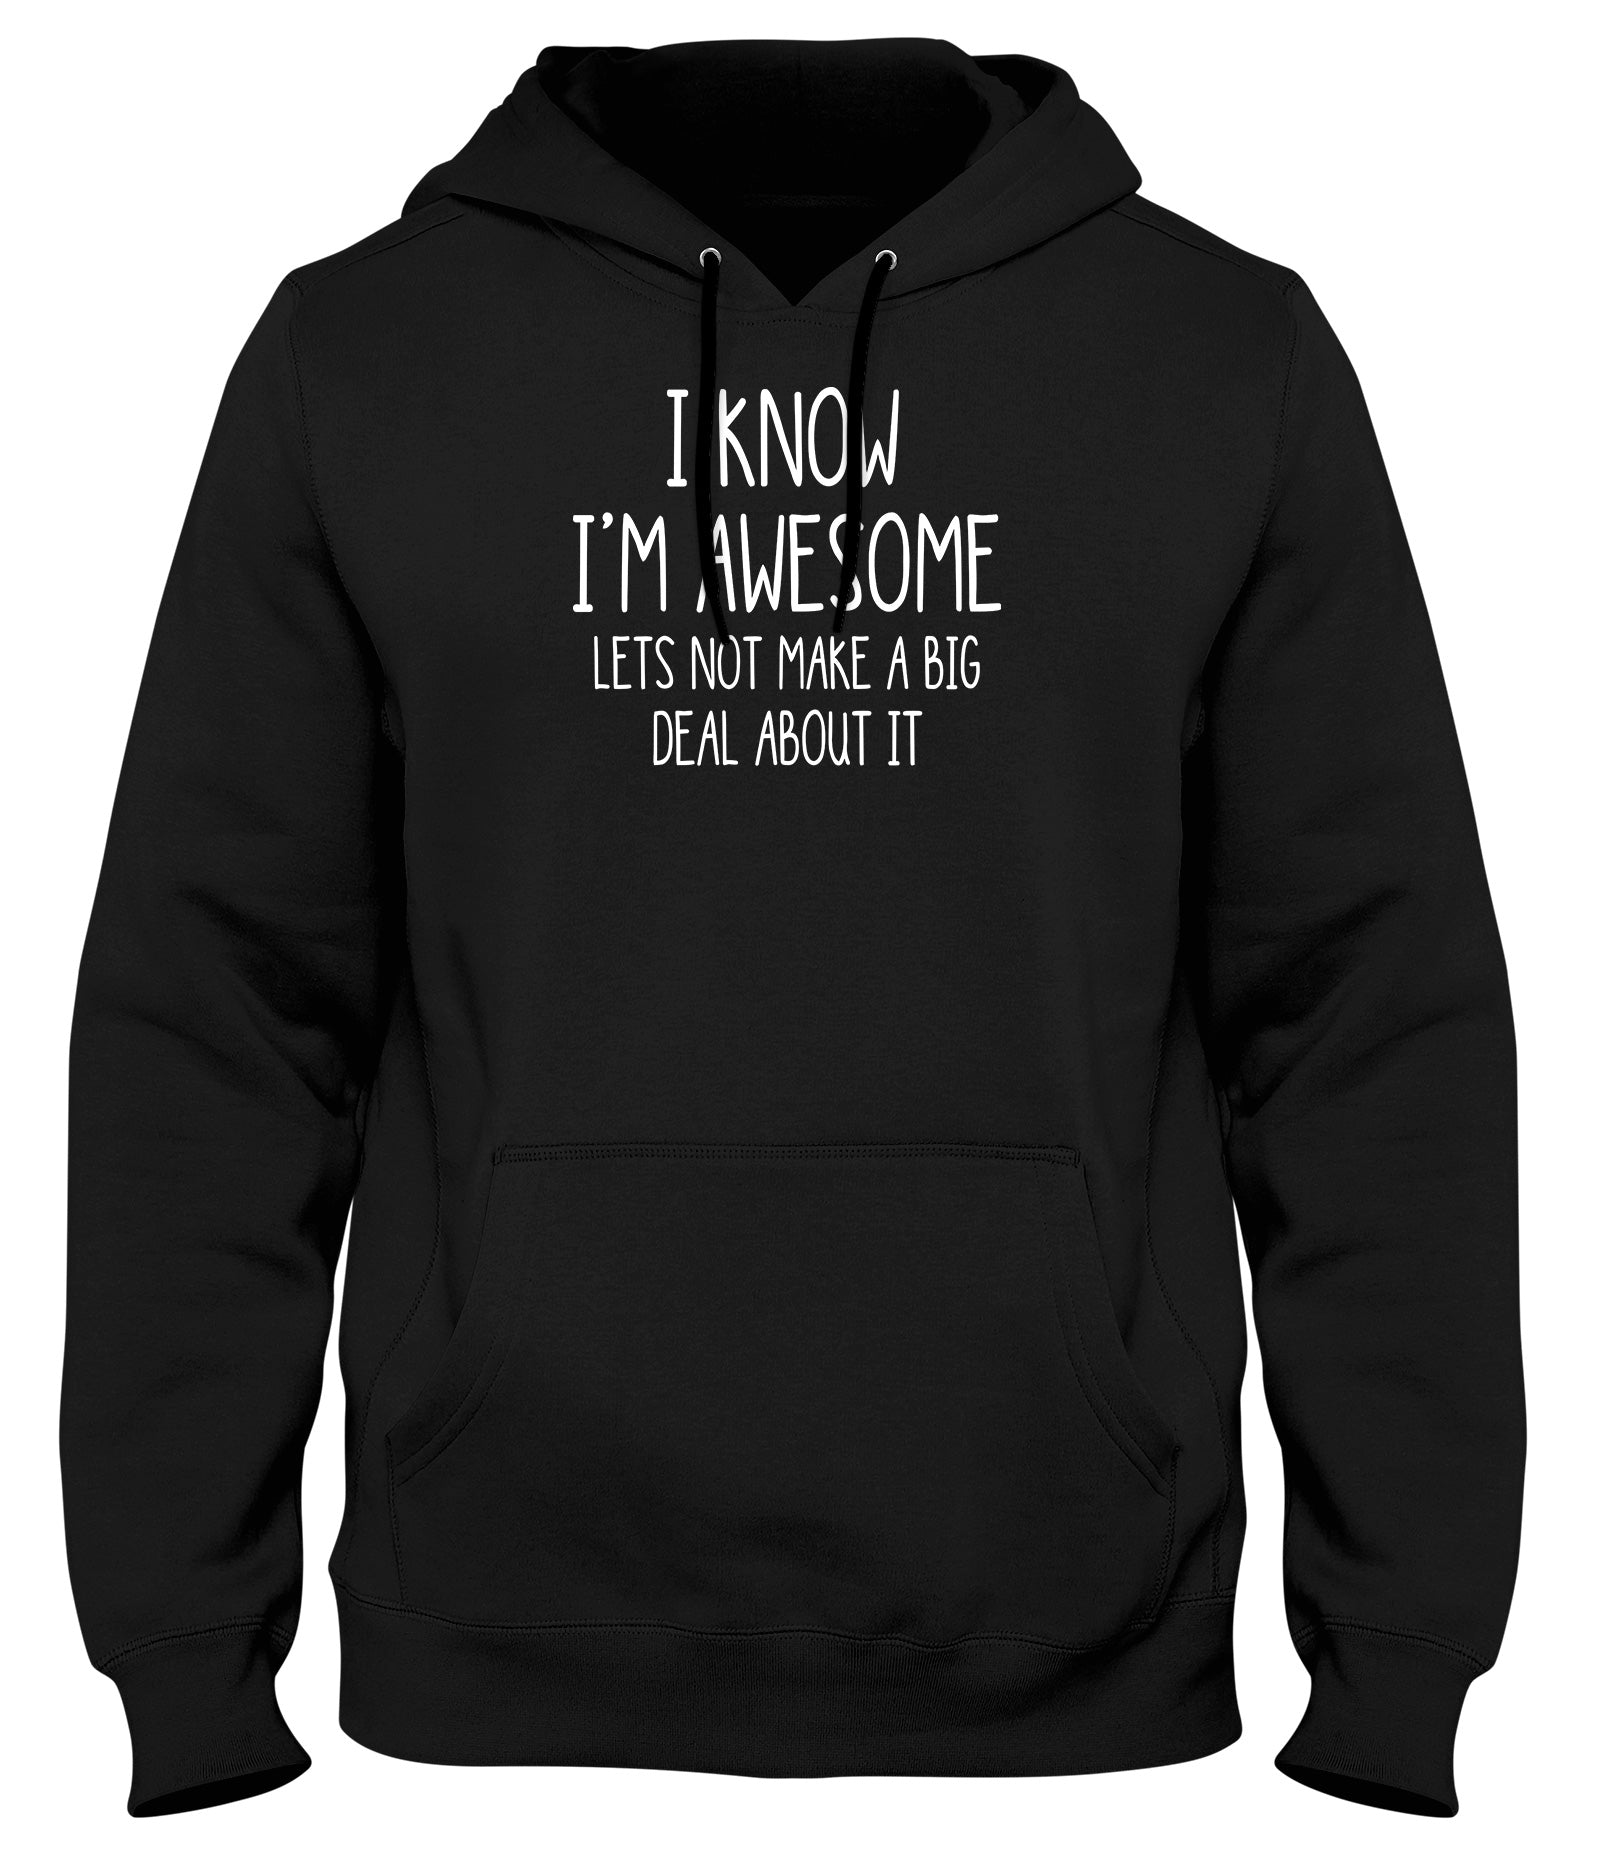 I KNOW I'M AWESOME  LET'S NOT MAKE A BIG DEAL OF IT MENS WOMENS UNISEX FUNNY HOODIE